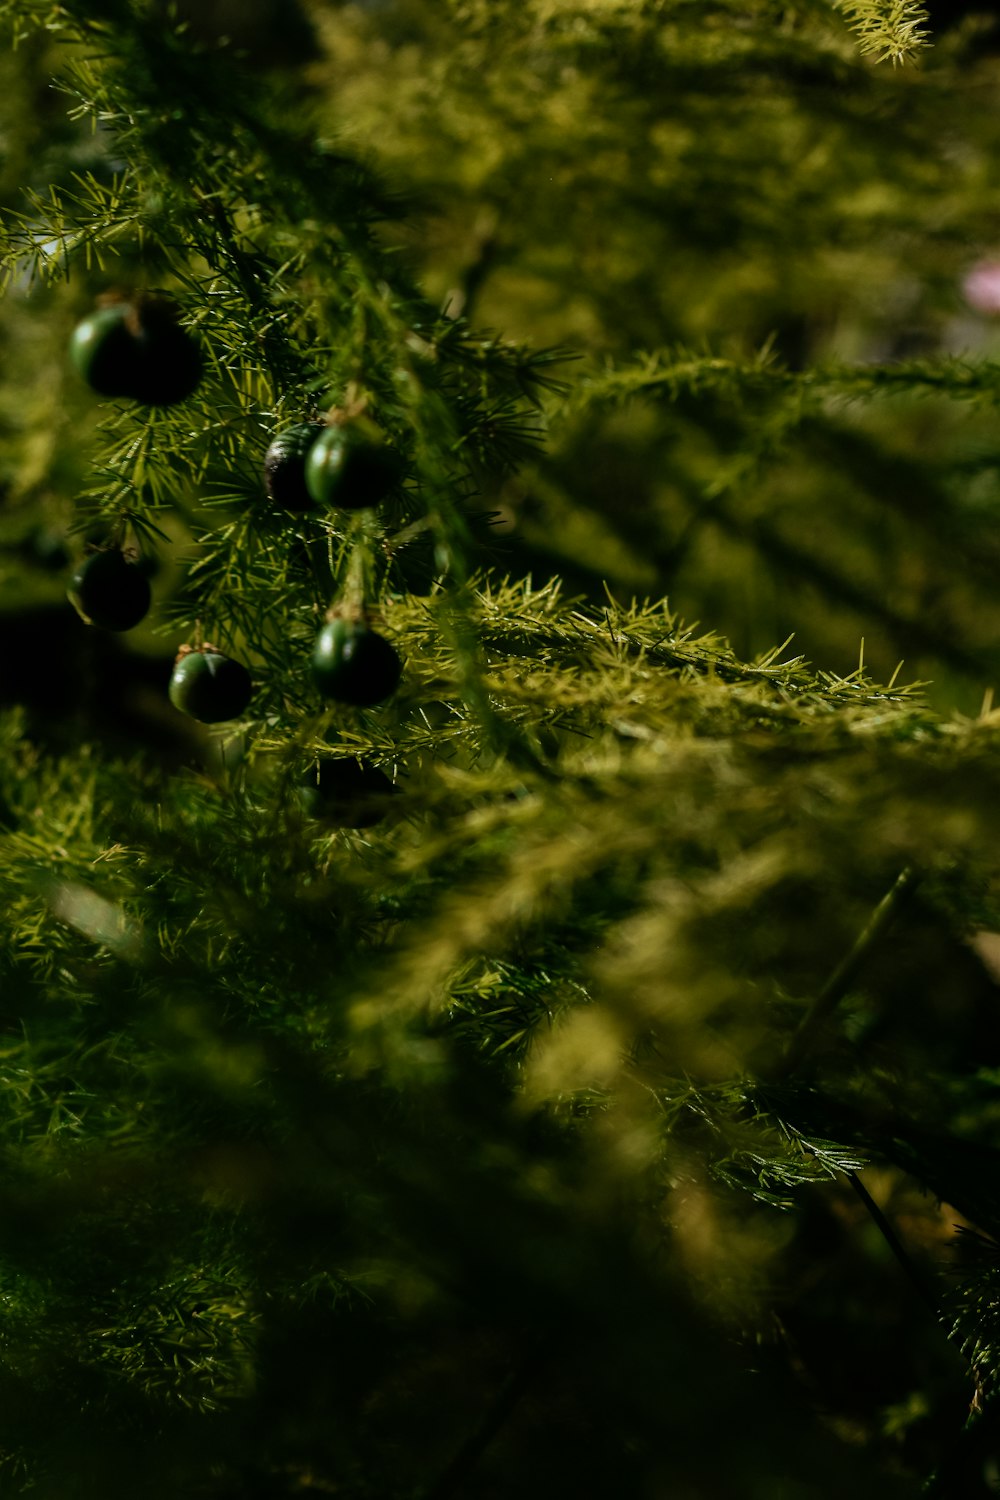 a close up of a pine tree with berries on it